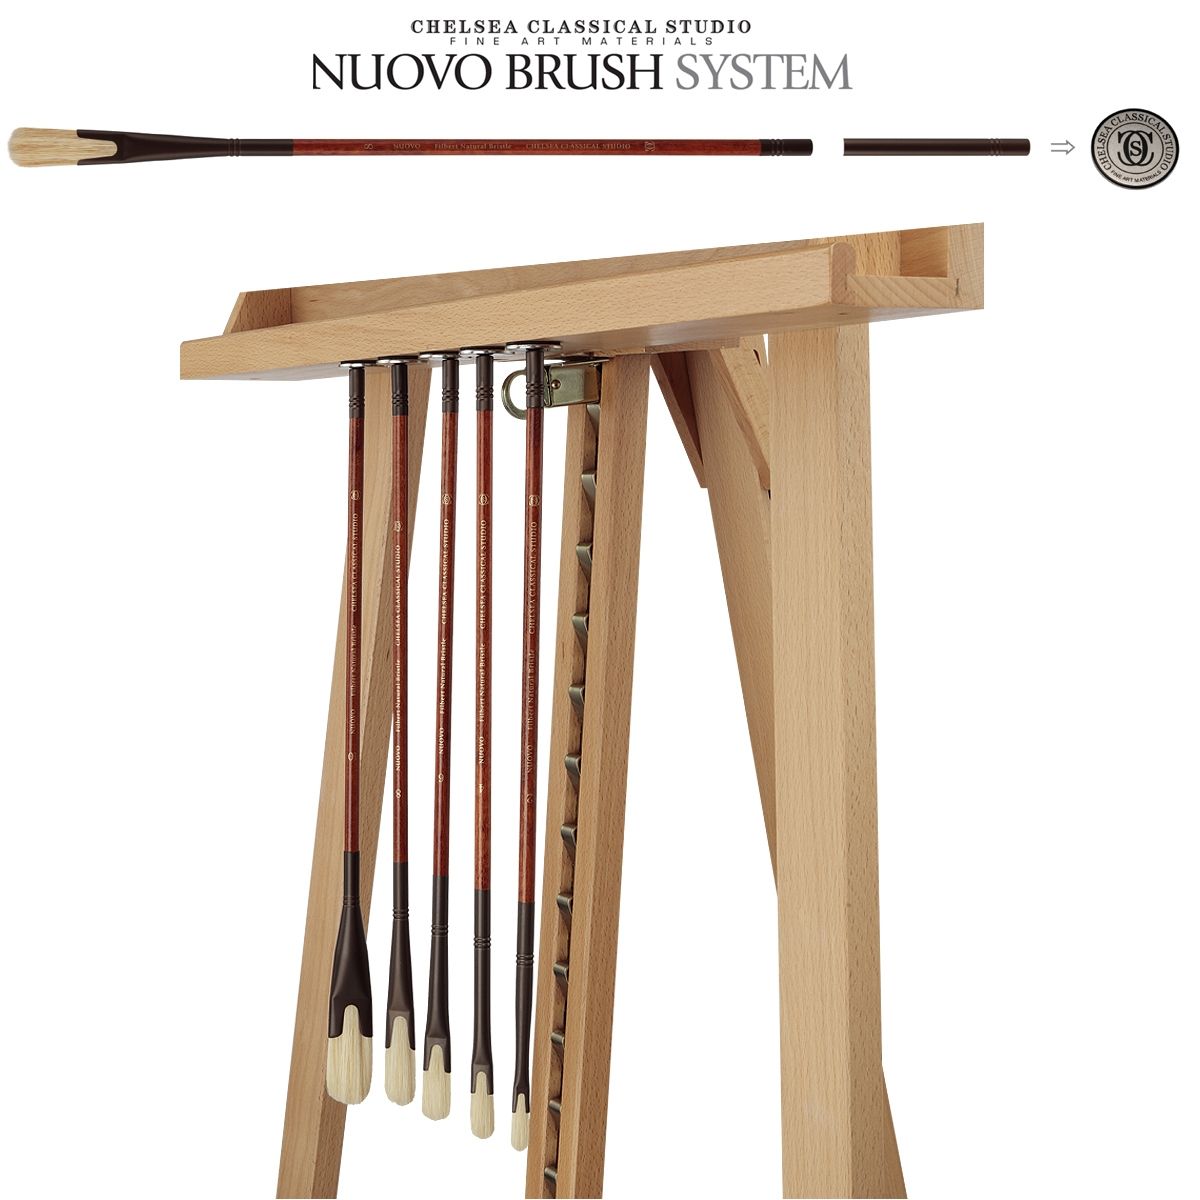 Chelsea Classical Studio Nuovo Brushes and Counterweight Magnets